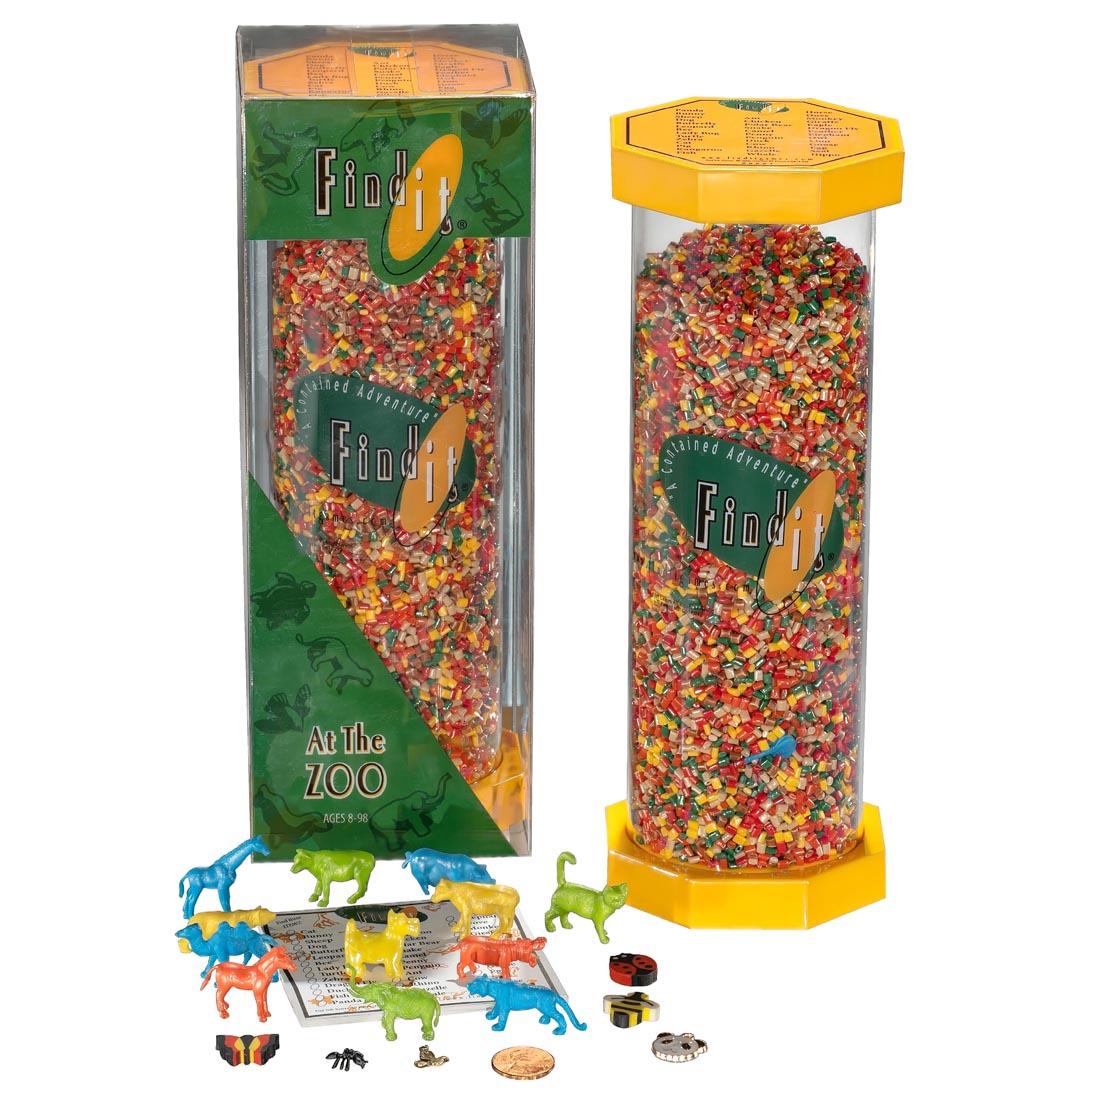 At The Zoo Find It Game, shown both in and out of package, plus some of the found pieces are shown outside the canister